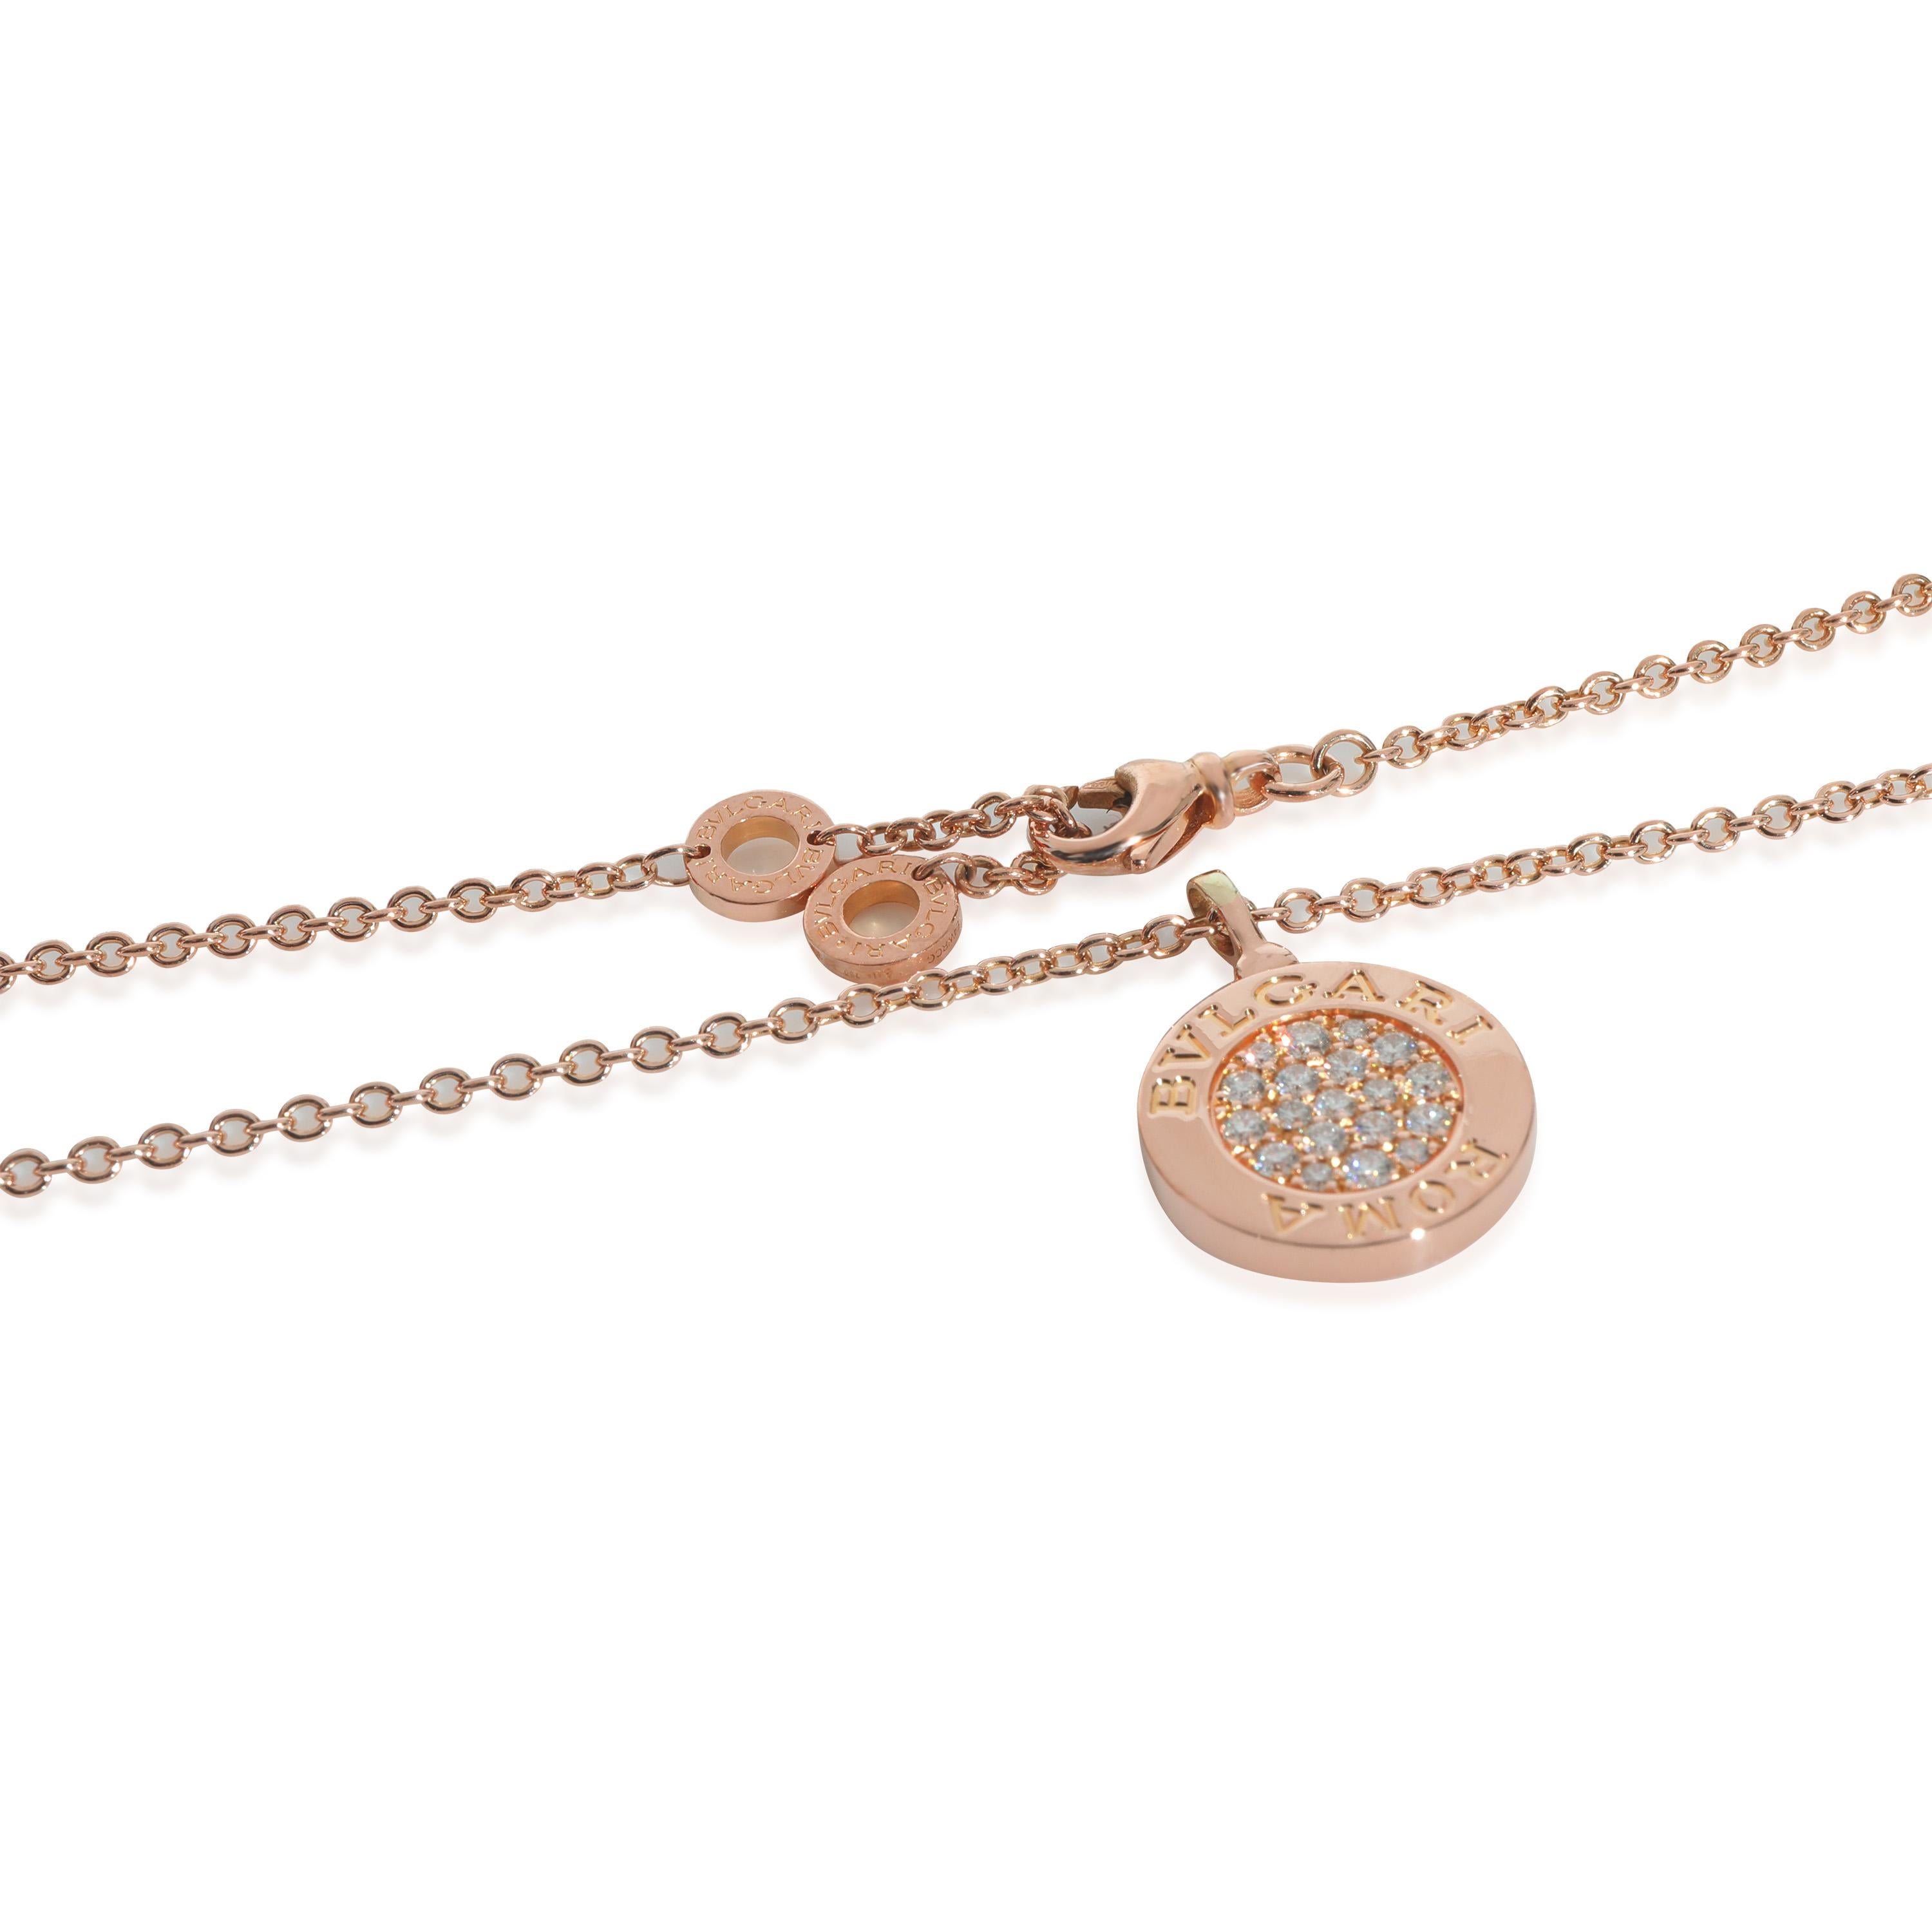 Bvlgari Bvlgari Diamond Necklace in 18k Rose Gold 0.34 Ctw In Excellent Condition For Sale In New York, NY